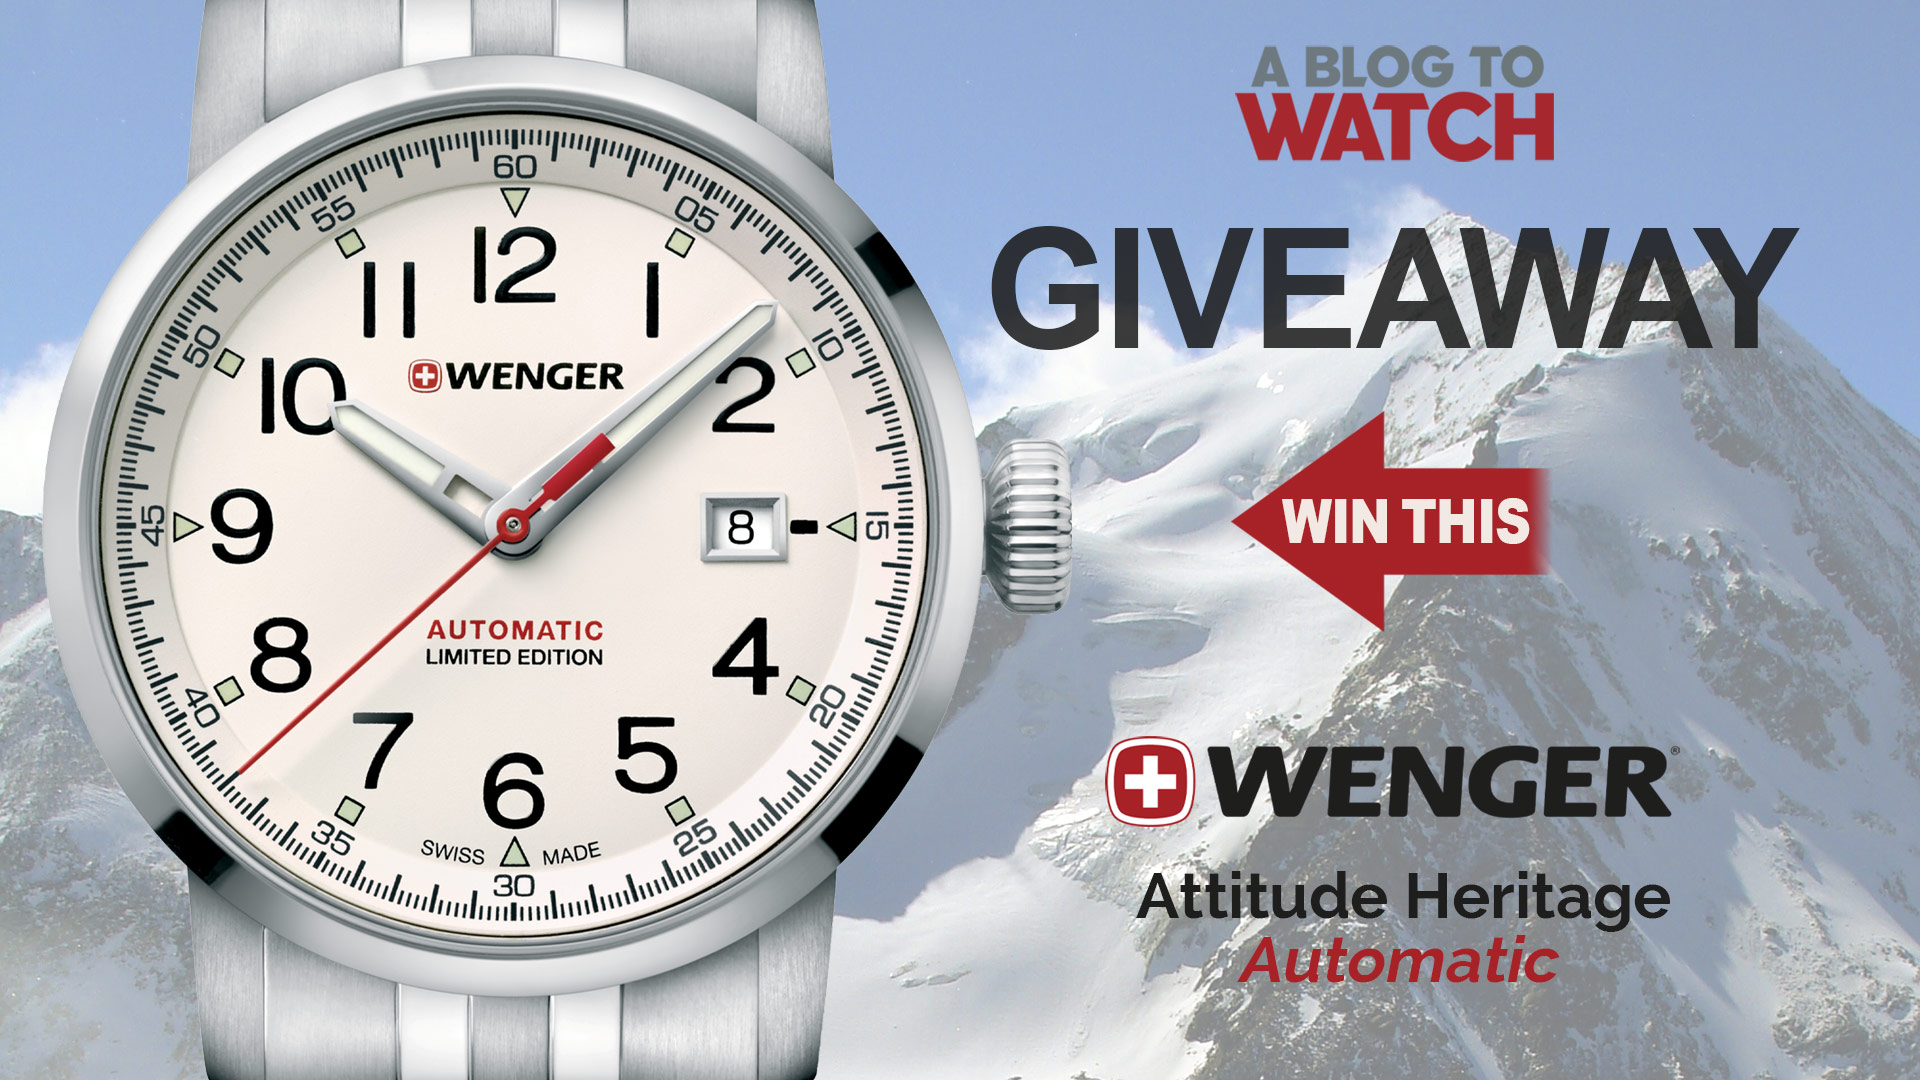 LAST CHANCE: Wenger Attitude Heritage Automatic Limited Edition